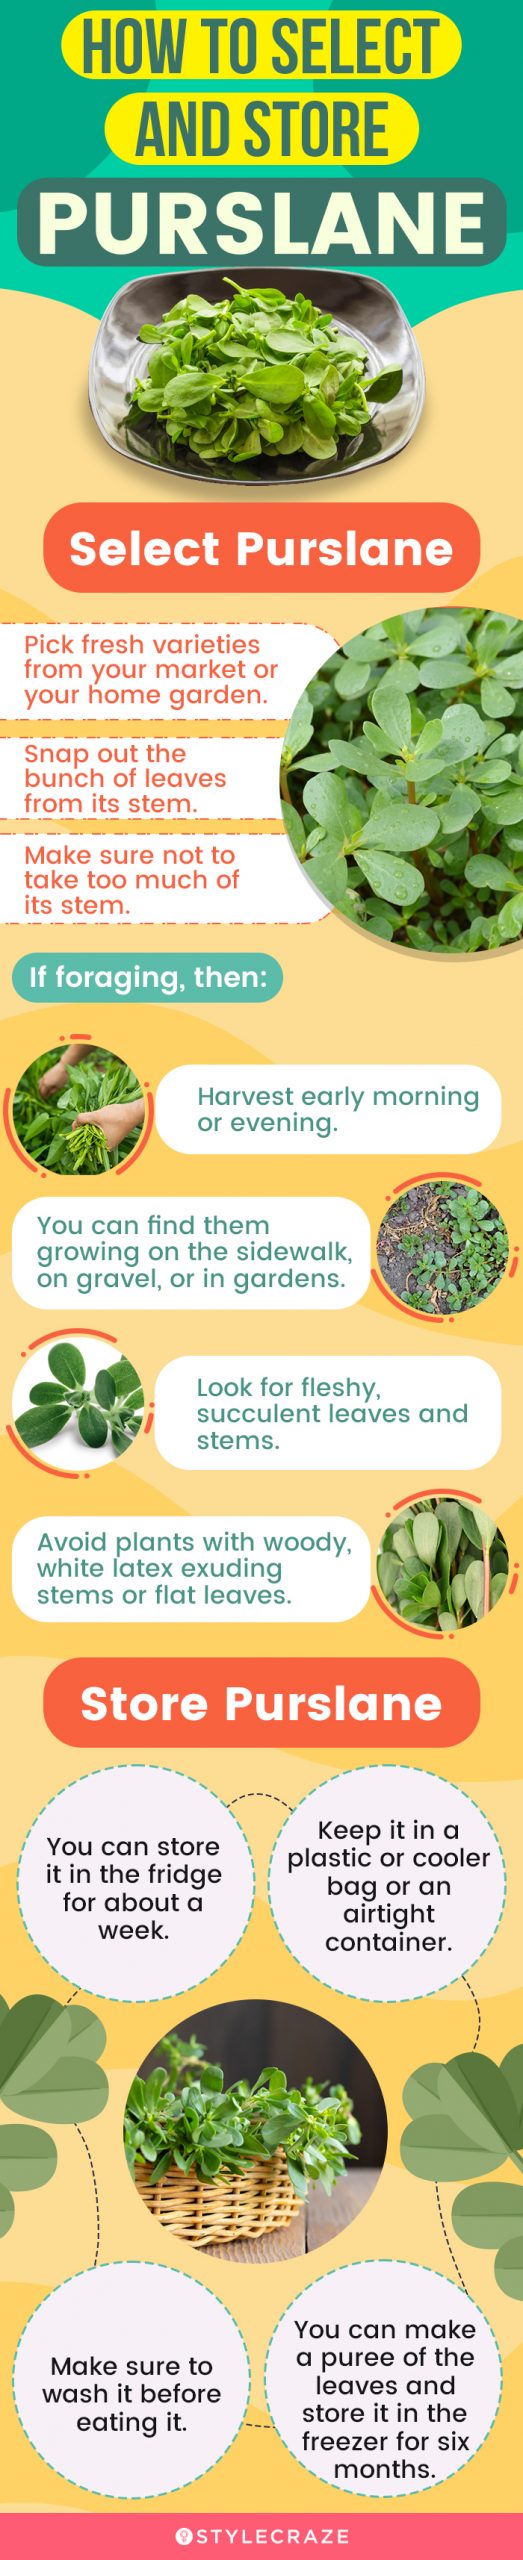 how to select and store purslane [infographic]